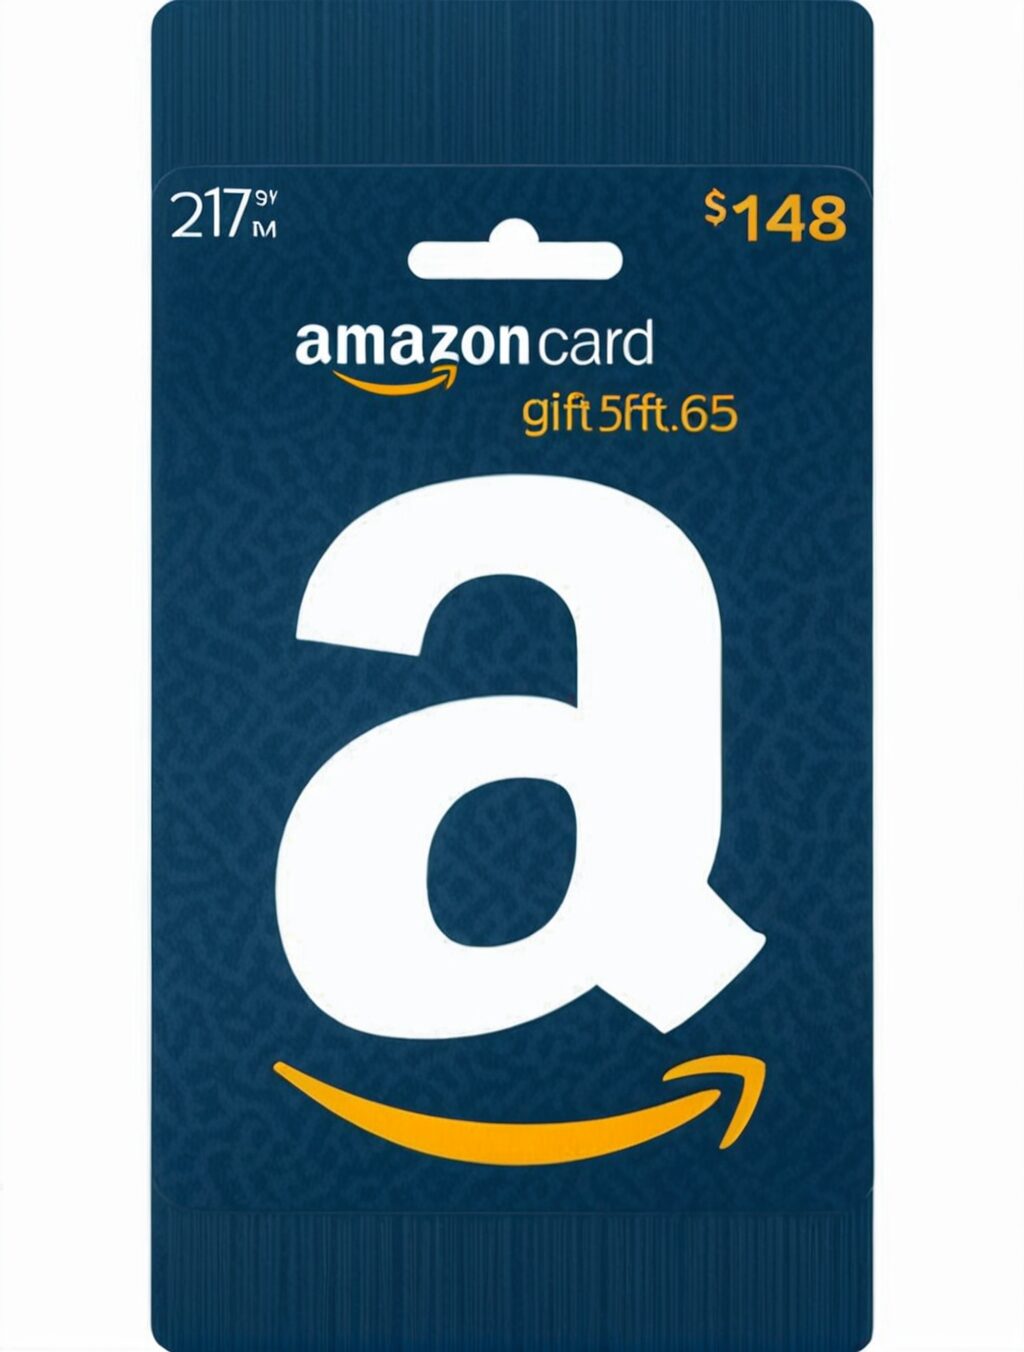 amazon gift card use in japan